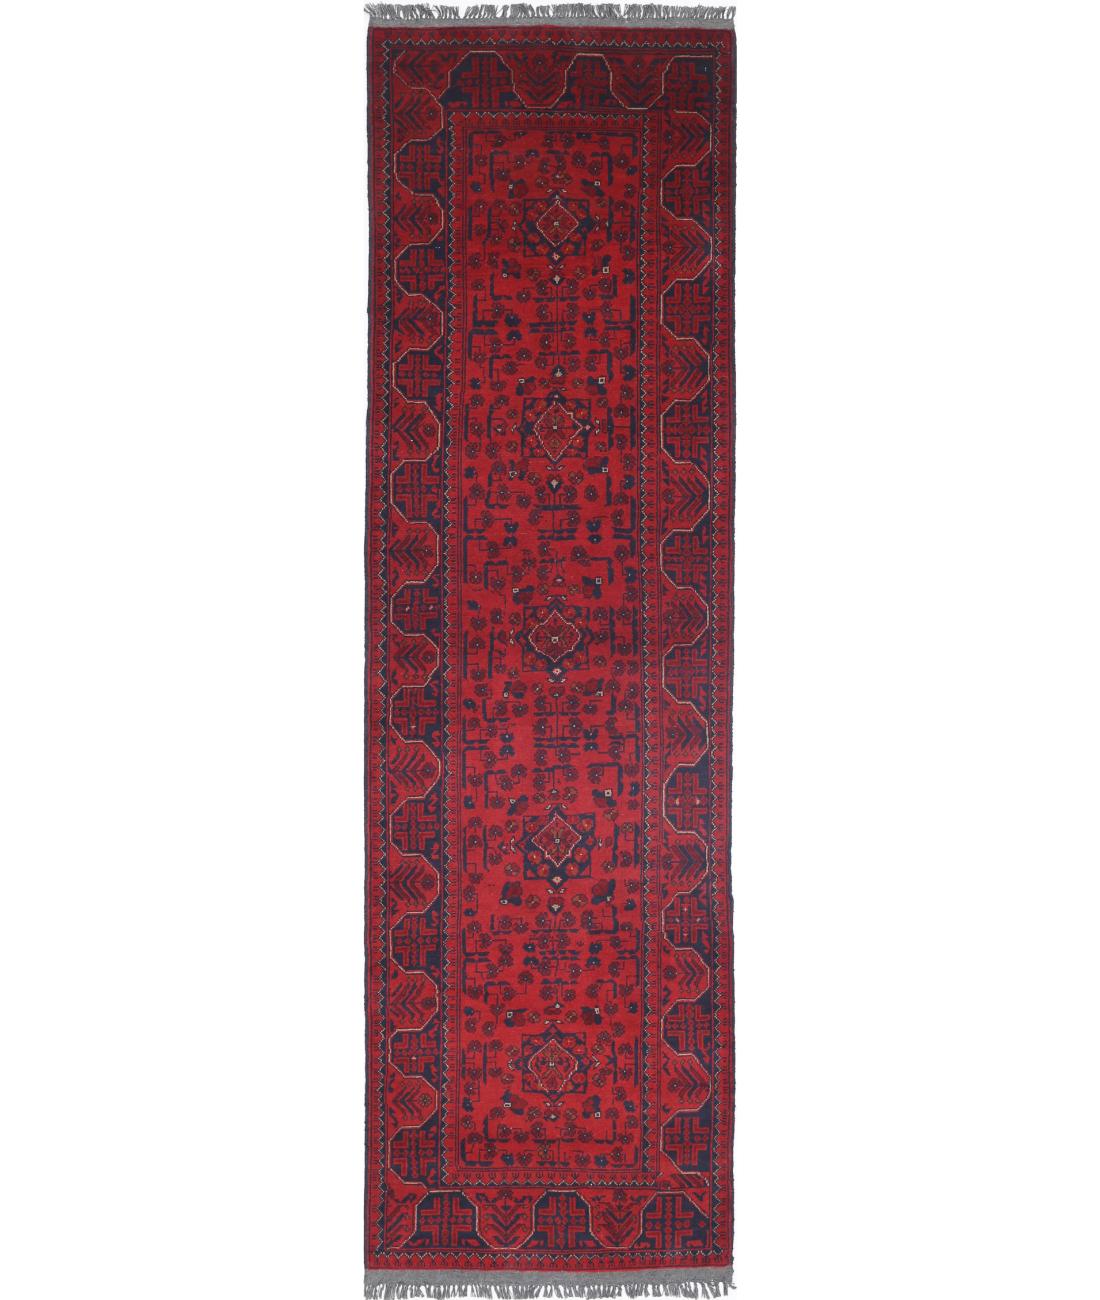 Afghan 2' 7" X 9' 5" Hand-Knotted Wool Rug 2' 7" X 9' 5" (79 X 287) / Red / Blue